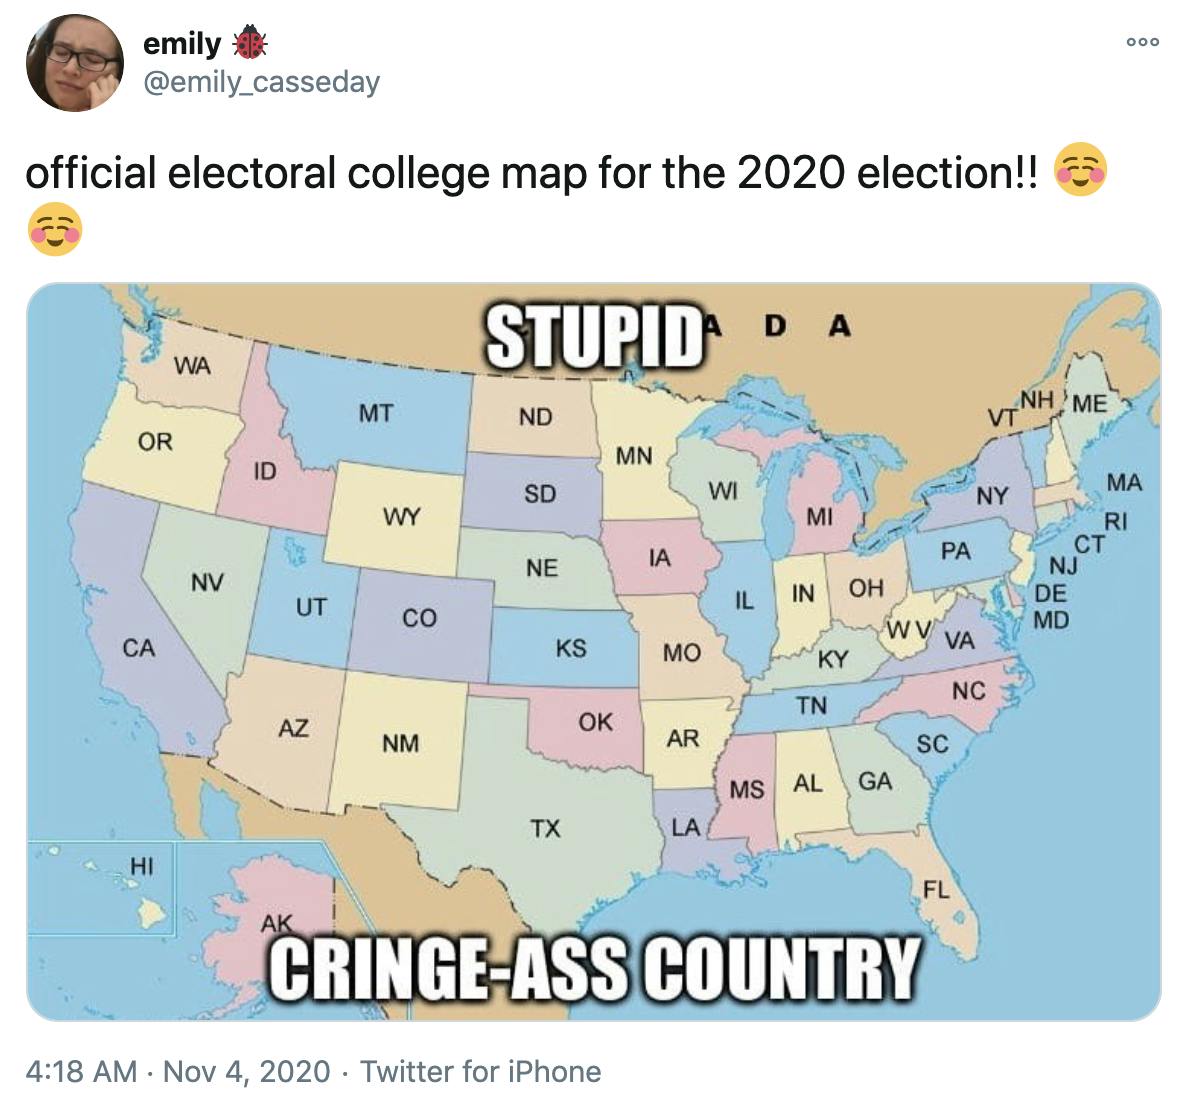 'official electoral college map for the 2020 election!! Smiling face' each state is a different pastel colour and the map is labelled 'stupid ass country'